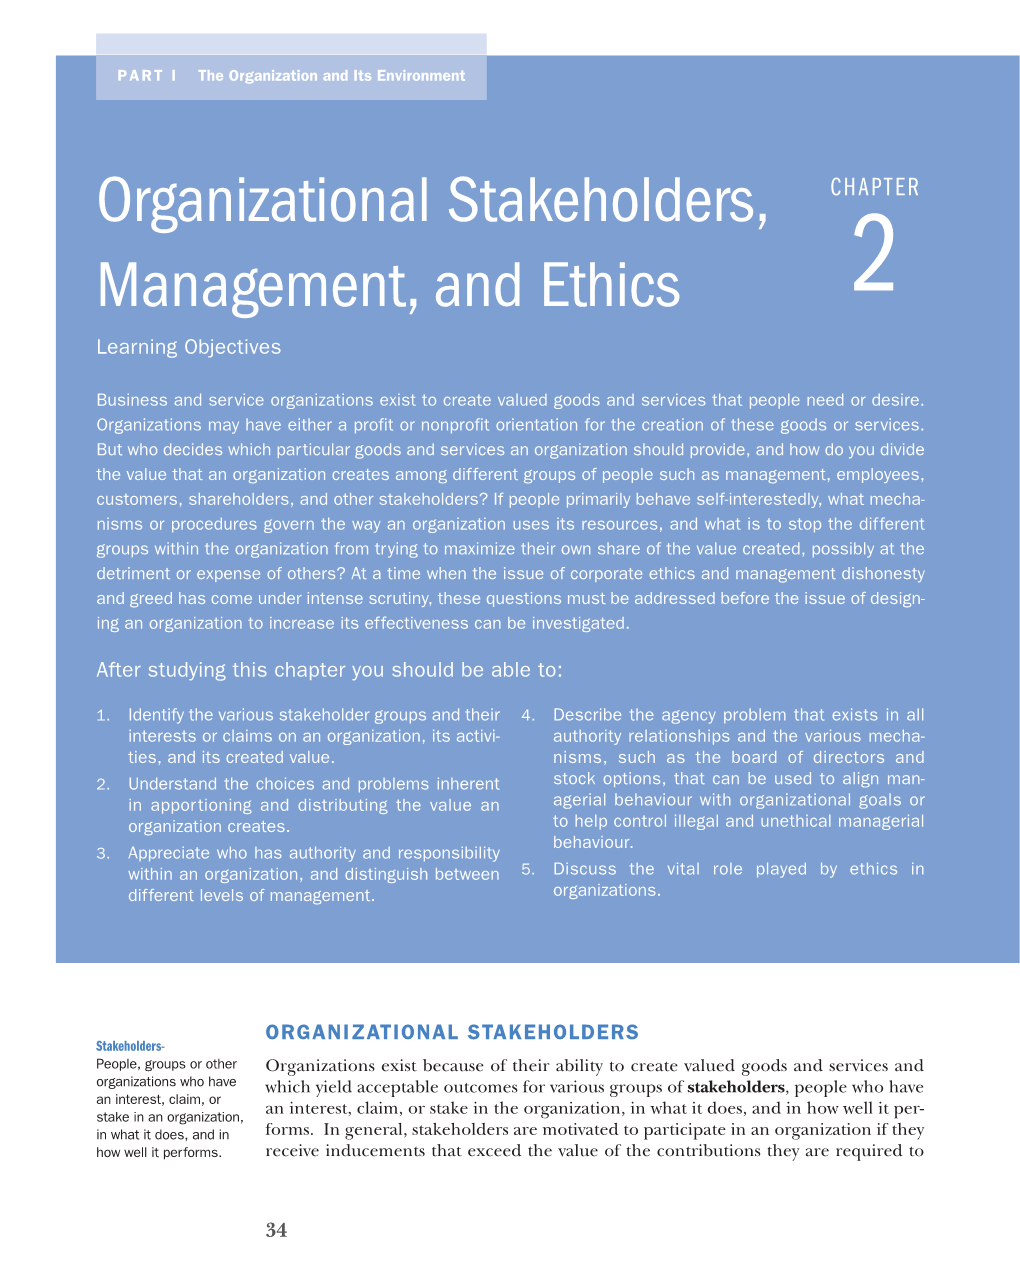 Organizational Stakeholders, Management, and Ethics